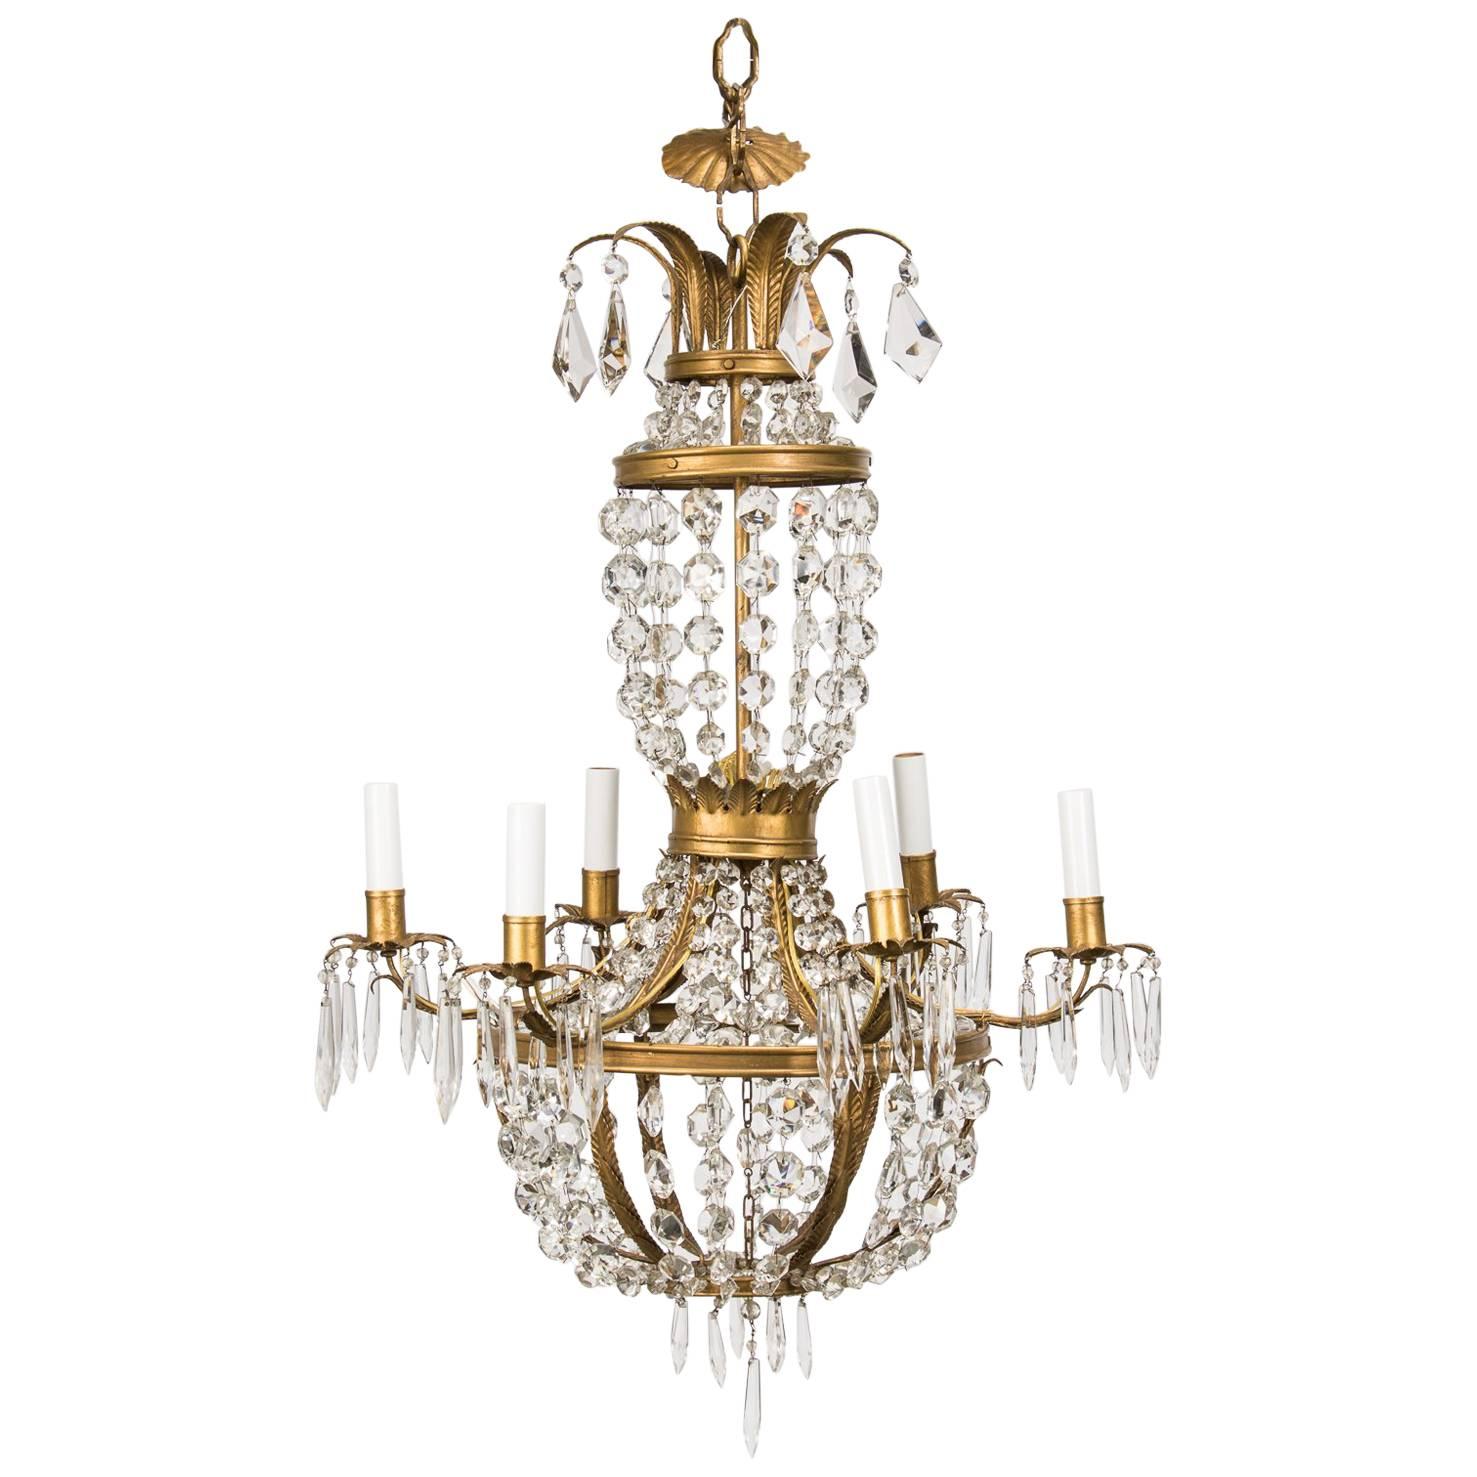 Unusual French Empire Chandelier